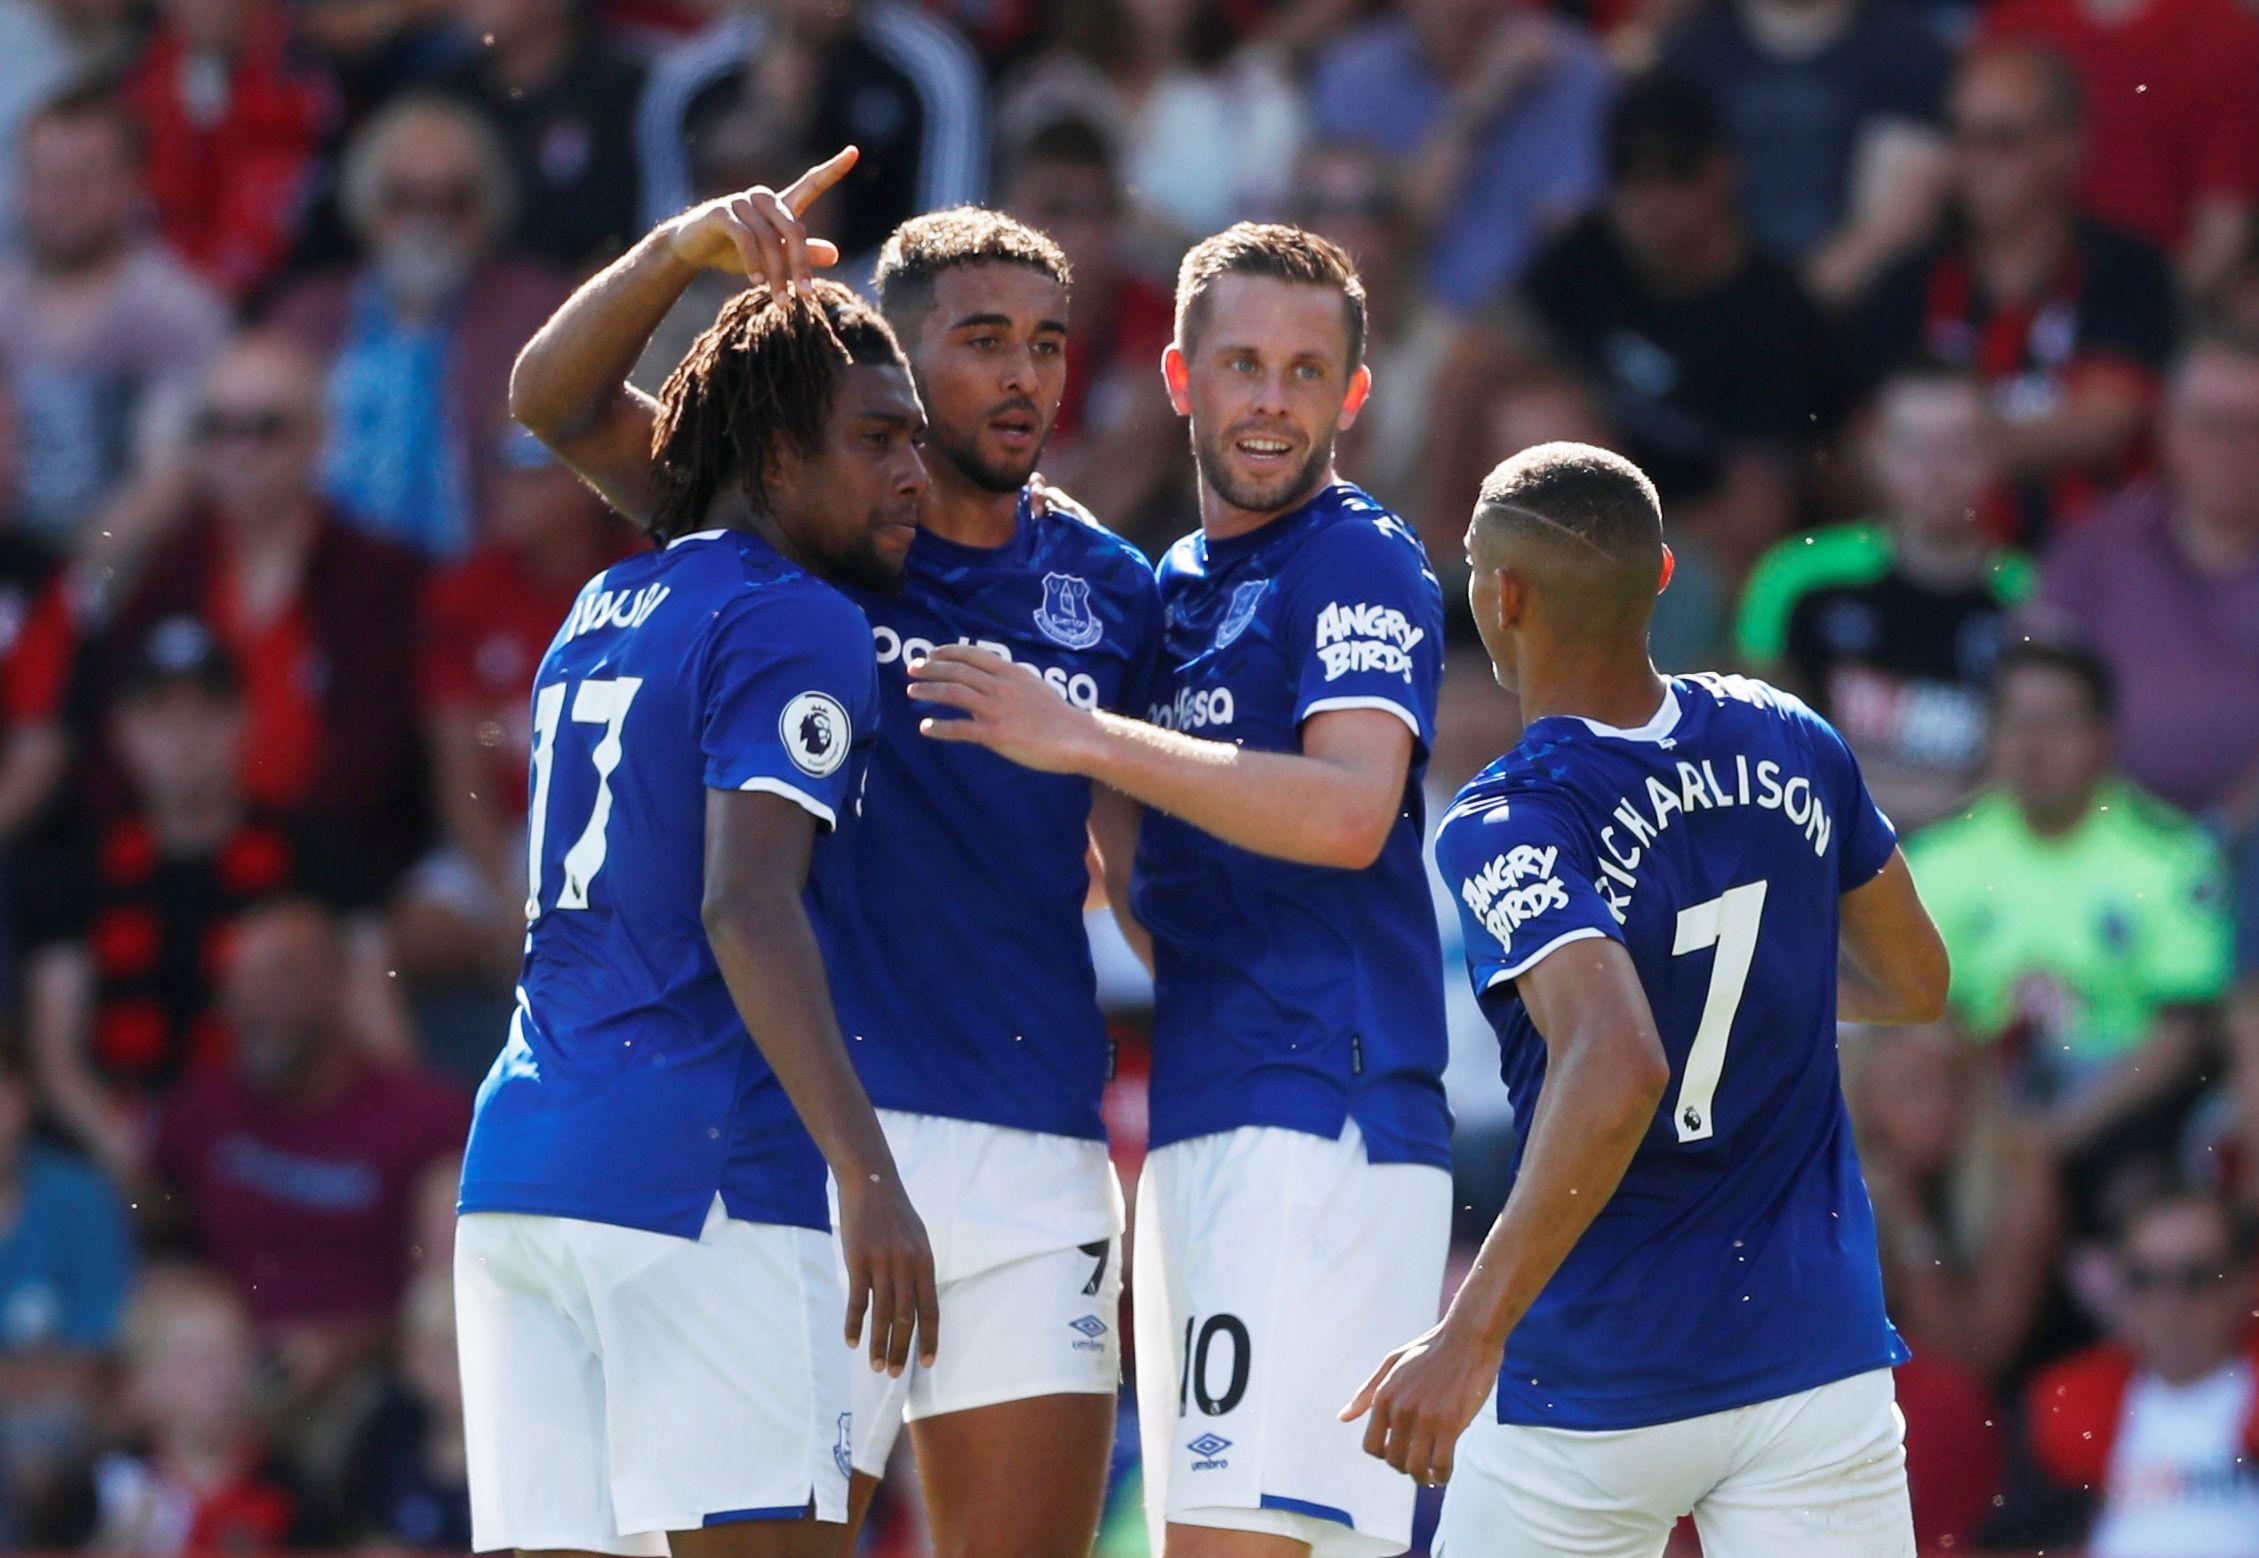 Soccer Football - Premier League - AFC Bournemouth v Everton - Vitality Stadium, Bournemouth, Britain - September 15, 2019  Everton's Dominic Calvert-Lewin celebrates scoring their first goal with team mates  Action Images via Reuters/Matthew Childs  EDITORIAL USE ONLY. No use with unauthorized audio, video, data, fixture lists, club/league logos or 